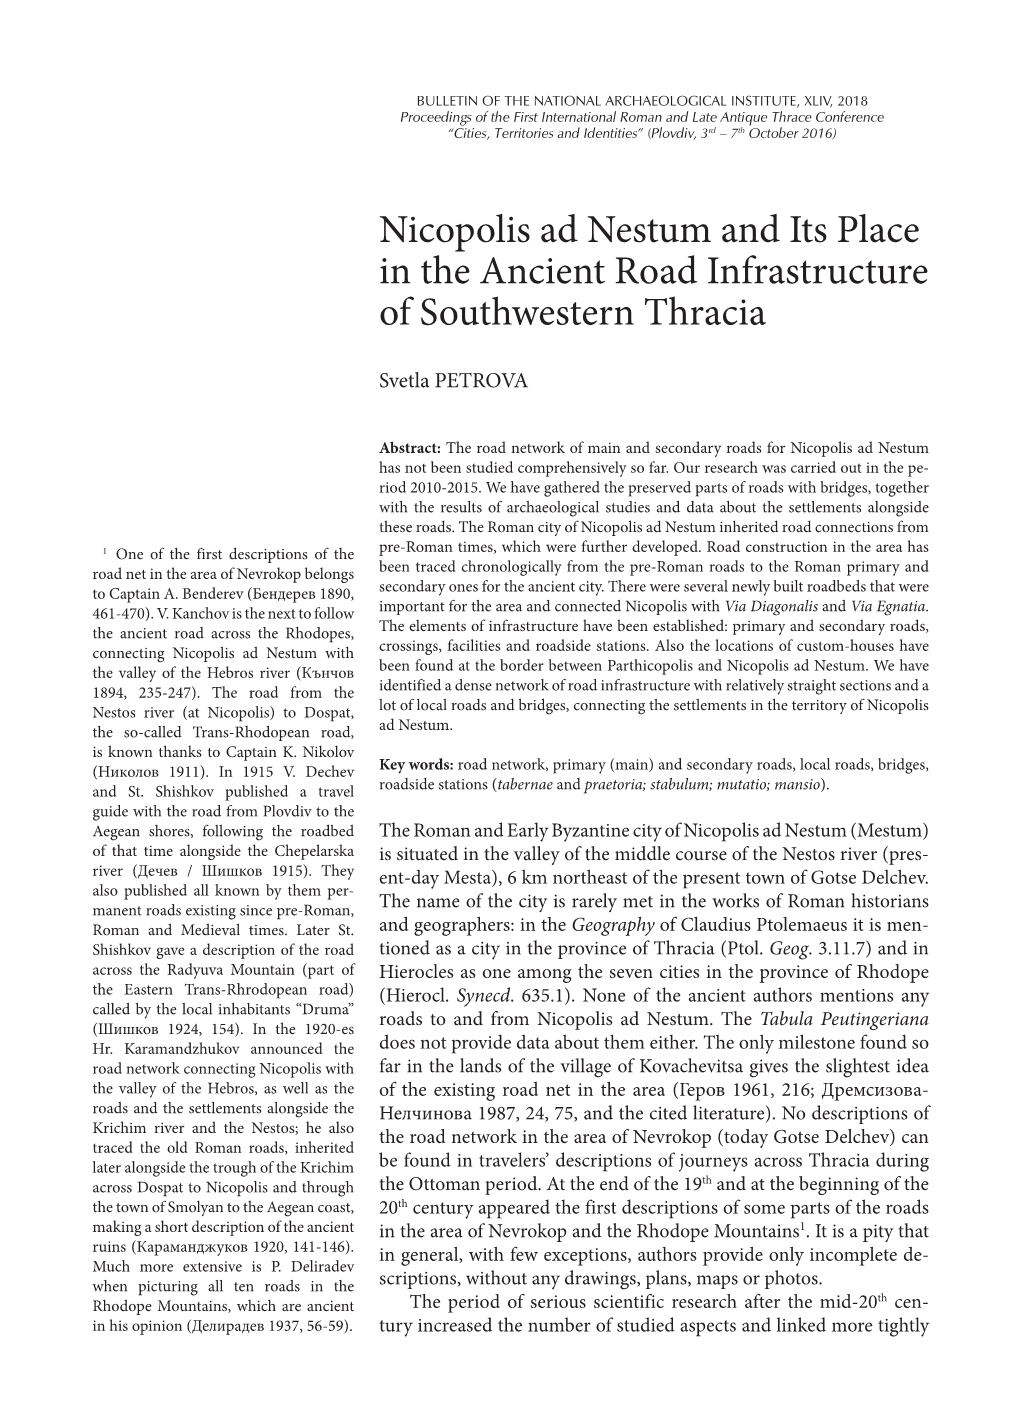 Nicopolis Ad Nestum and Its Place in the Ancient Road Infrastructure of Southwestern Thracia